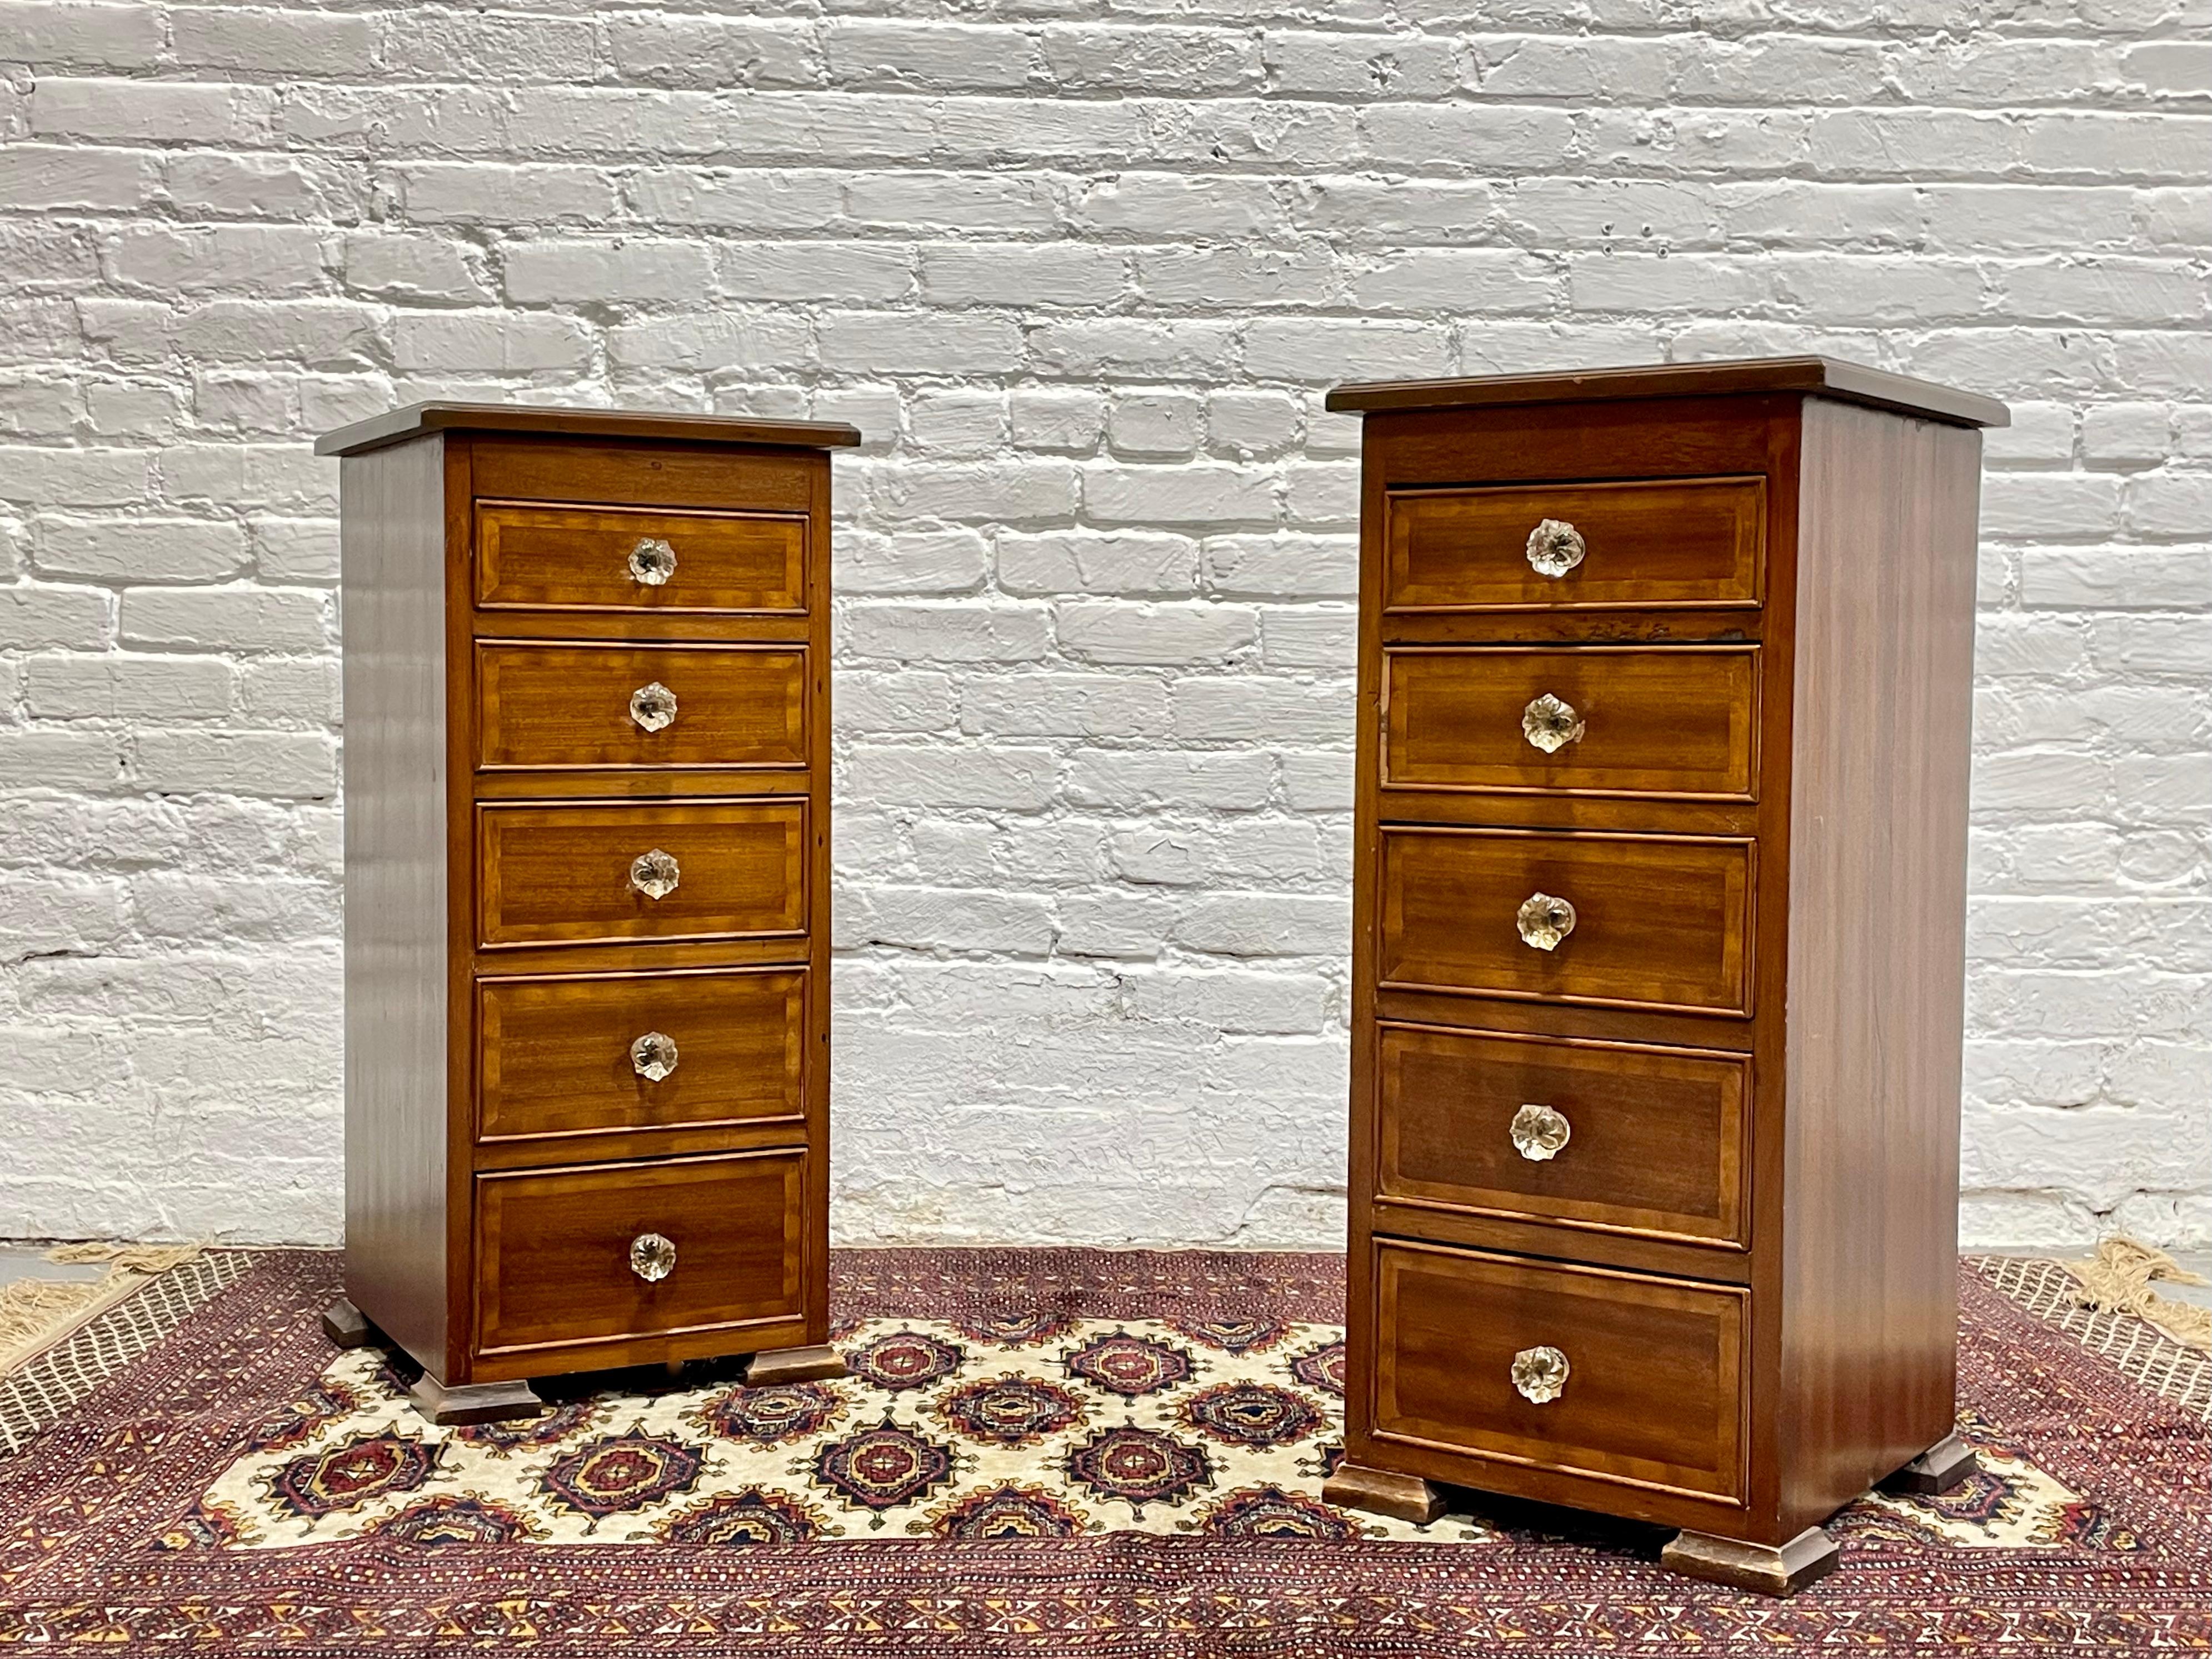 Pair of Early 20th Century Federal Style Mahogany Cabinets.  Each stand has five dovetailed drawers with glass flower shaped knobs. These would be perfect as nightstands, lingerie cabinets or storage for crafts. Beautifully crafted with lovely